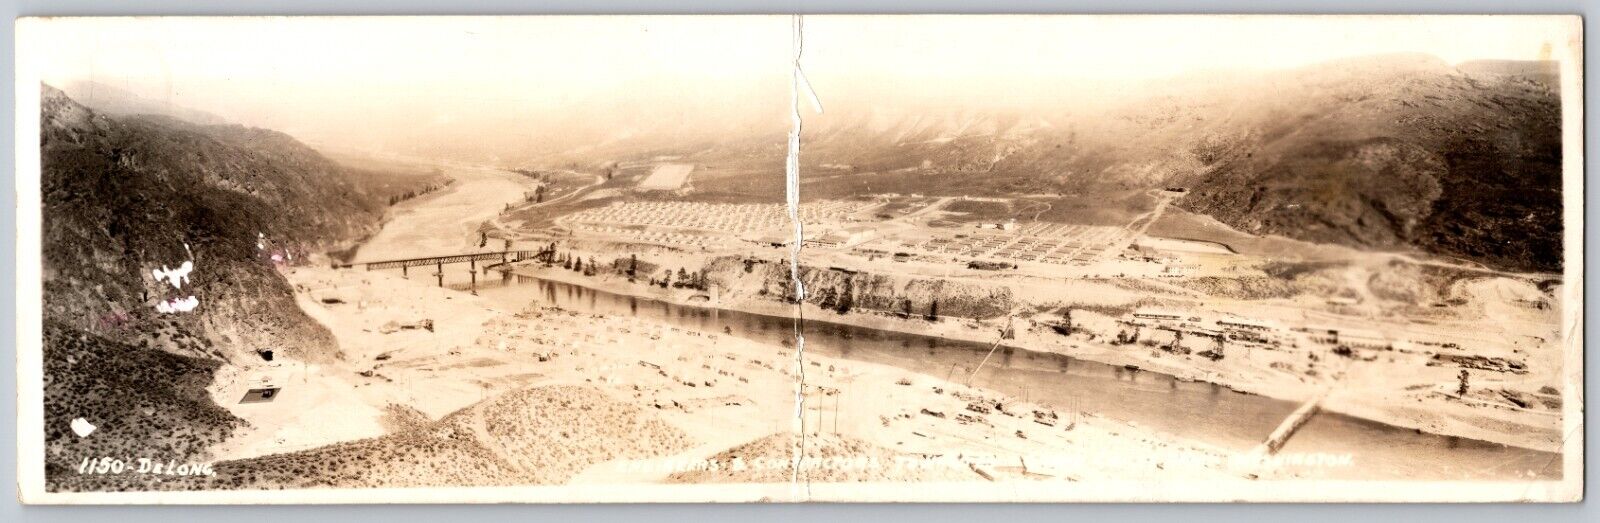 Engineers\' & Contractors\' Town Grand Coulee Dam Washington c1935 Real Photo RPPC